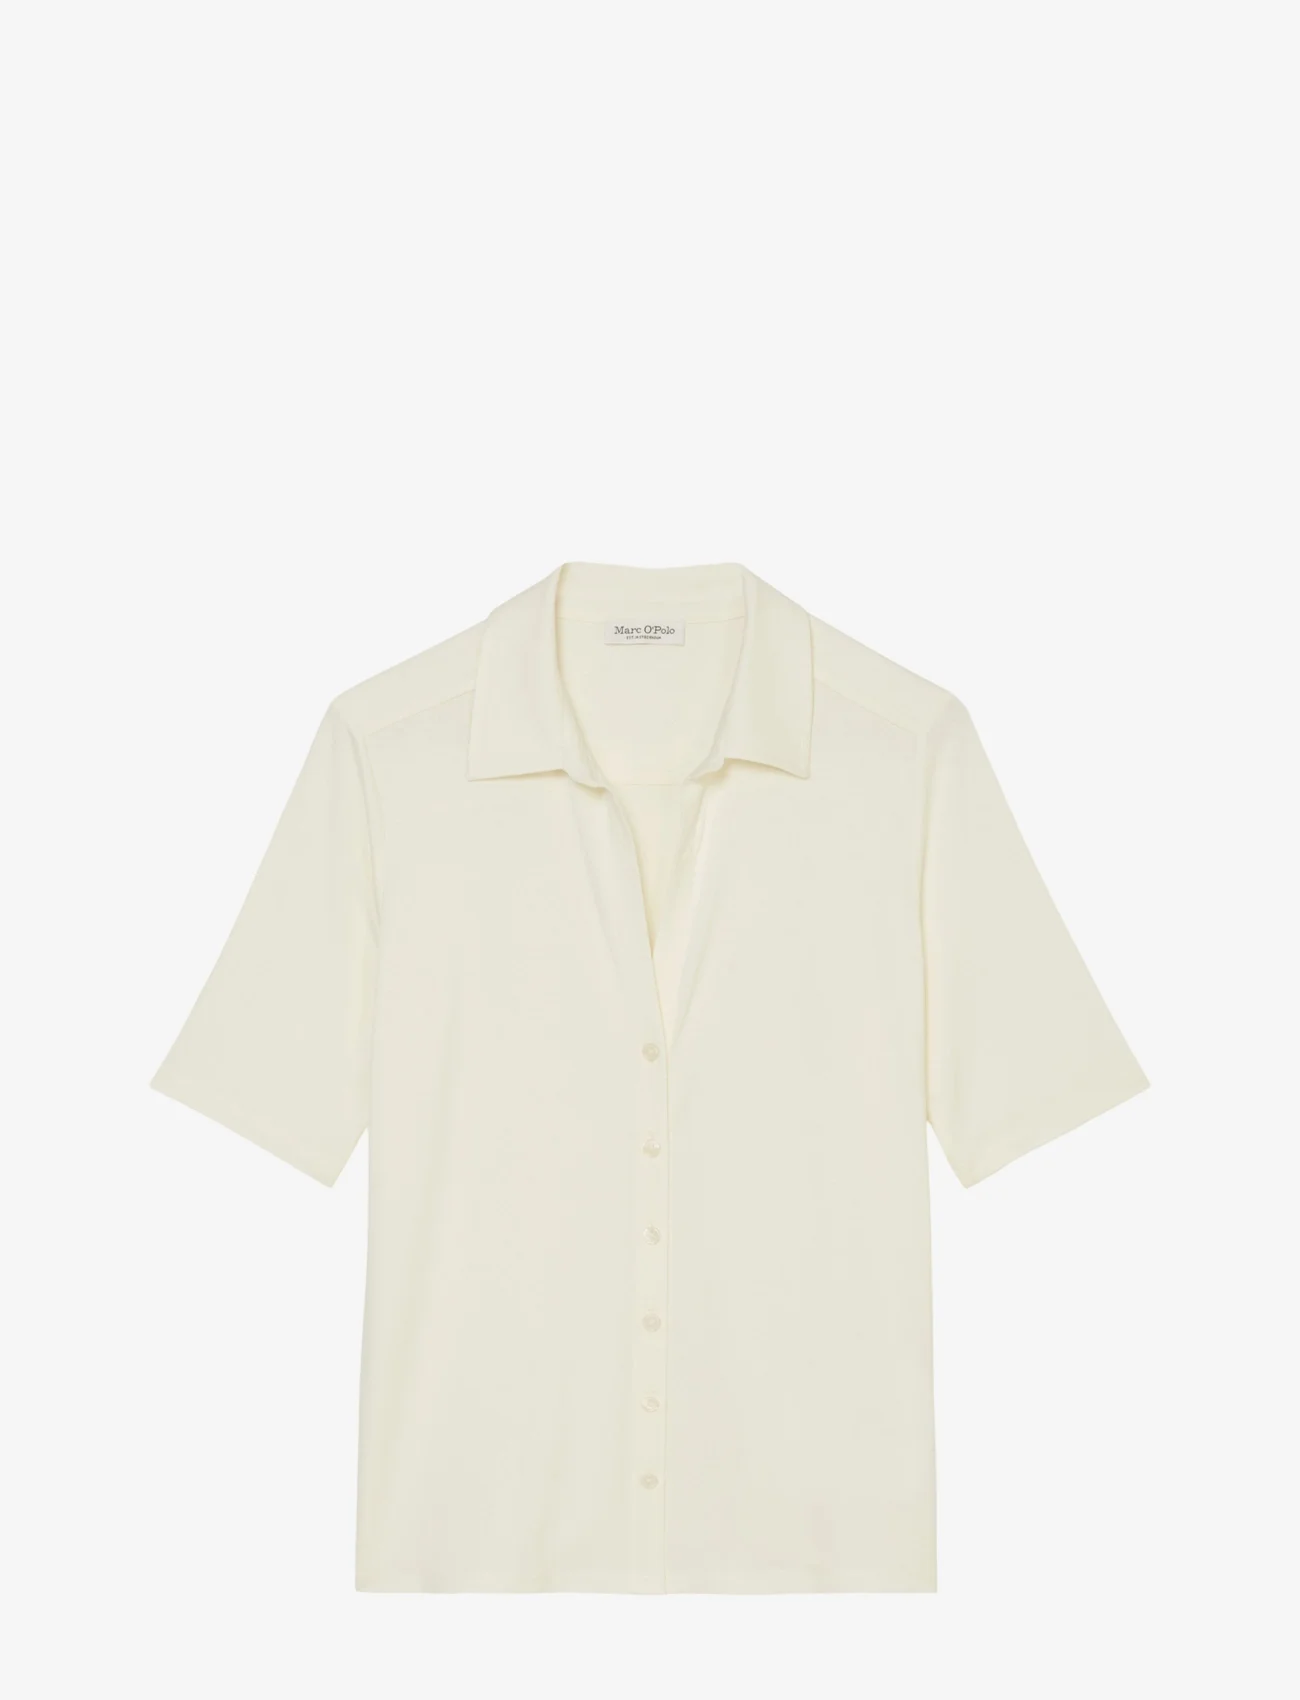 Marc O'Polo - T-SHIRTS SHORT SLEEVE - short-sleeved blouses - off white - 0